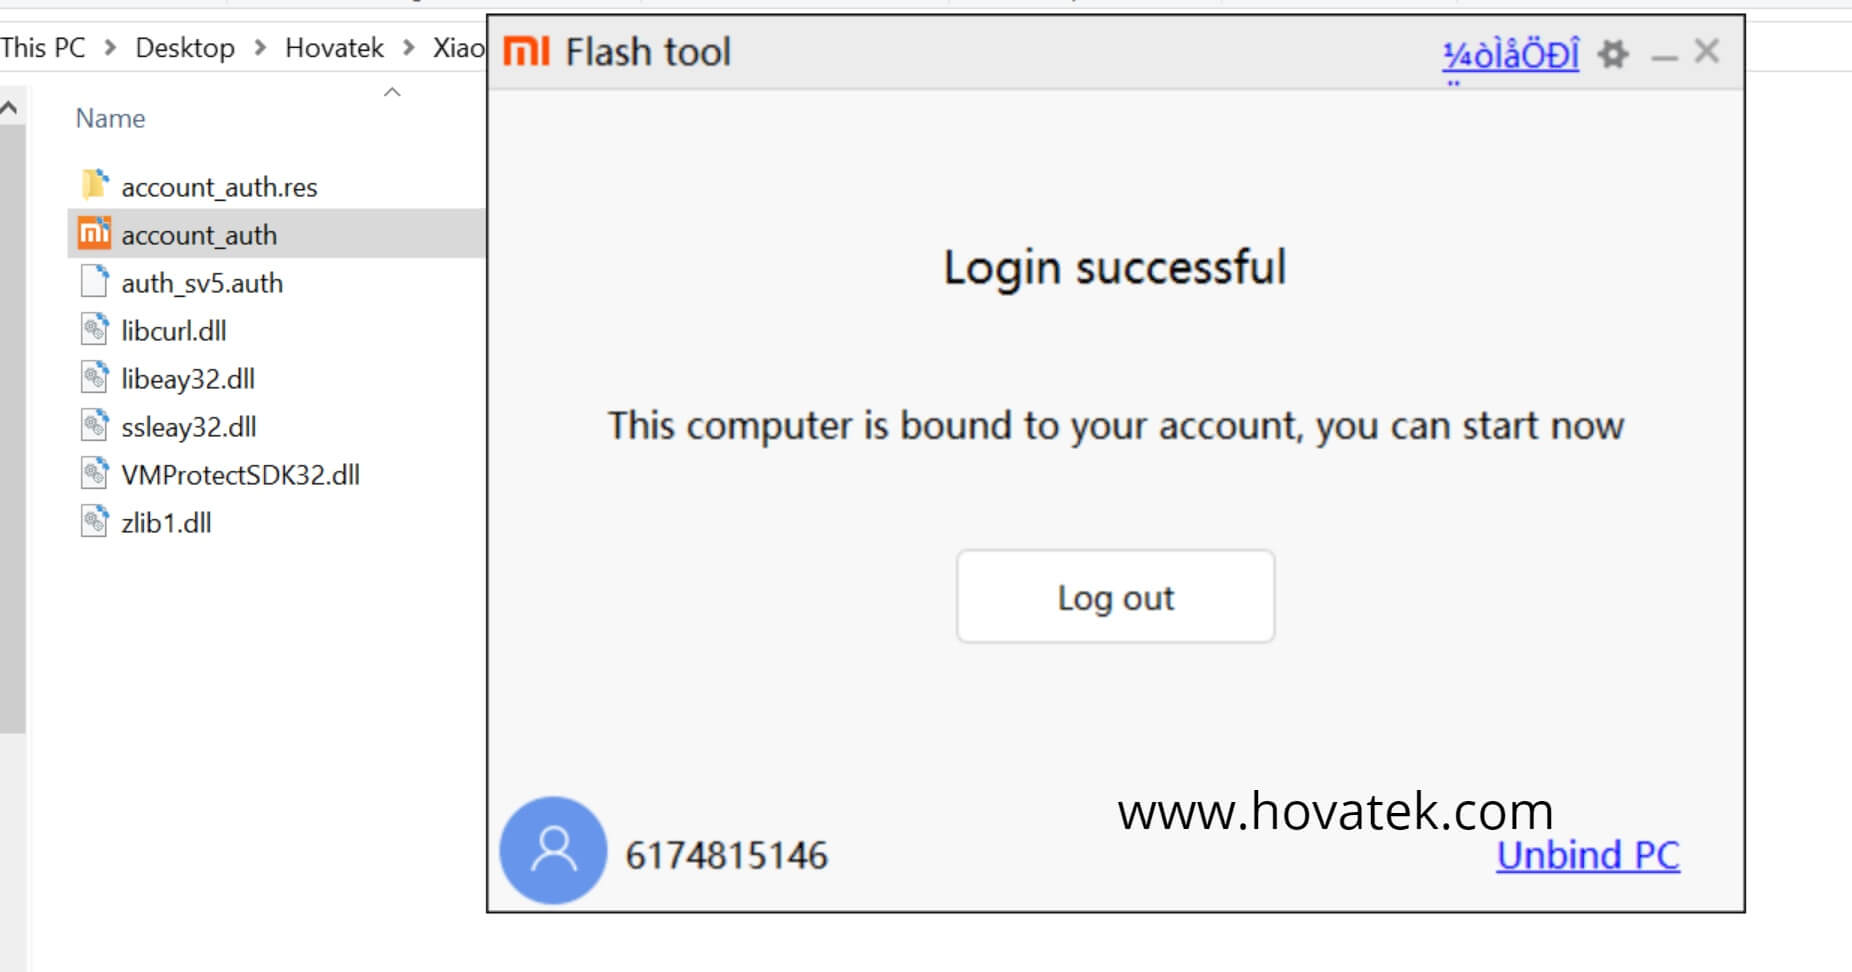 [Image: How-to-bind-a-Mi-account-to-a-PC-in-Mi-Flash-Tool-5.jpg]